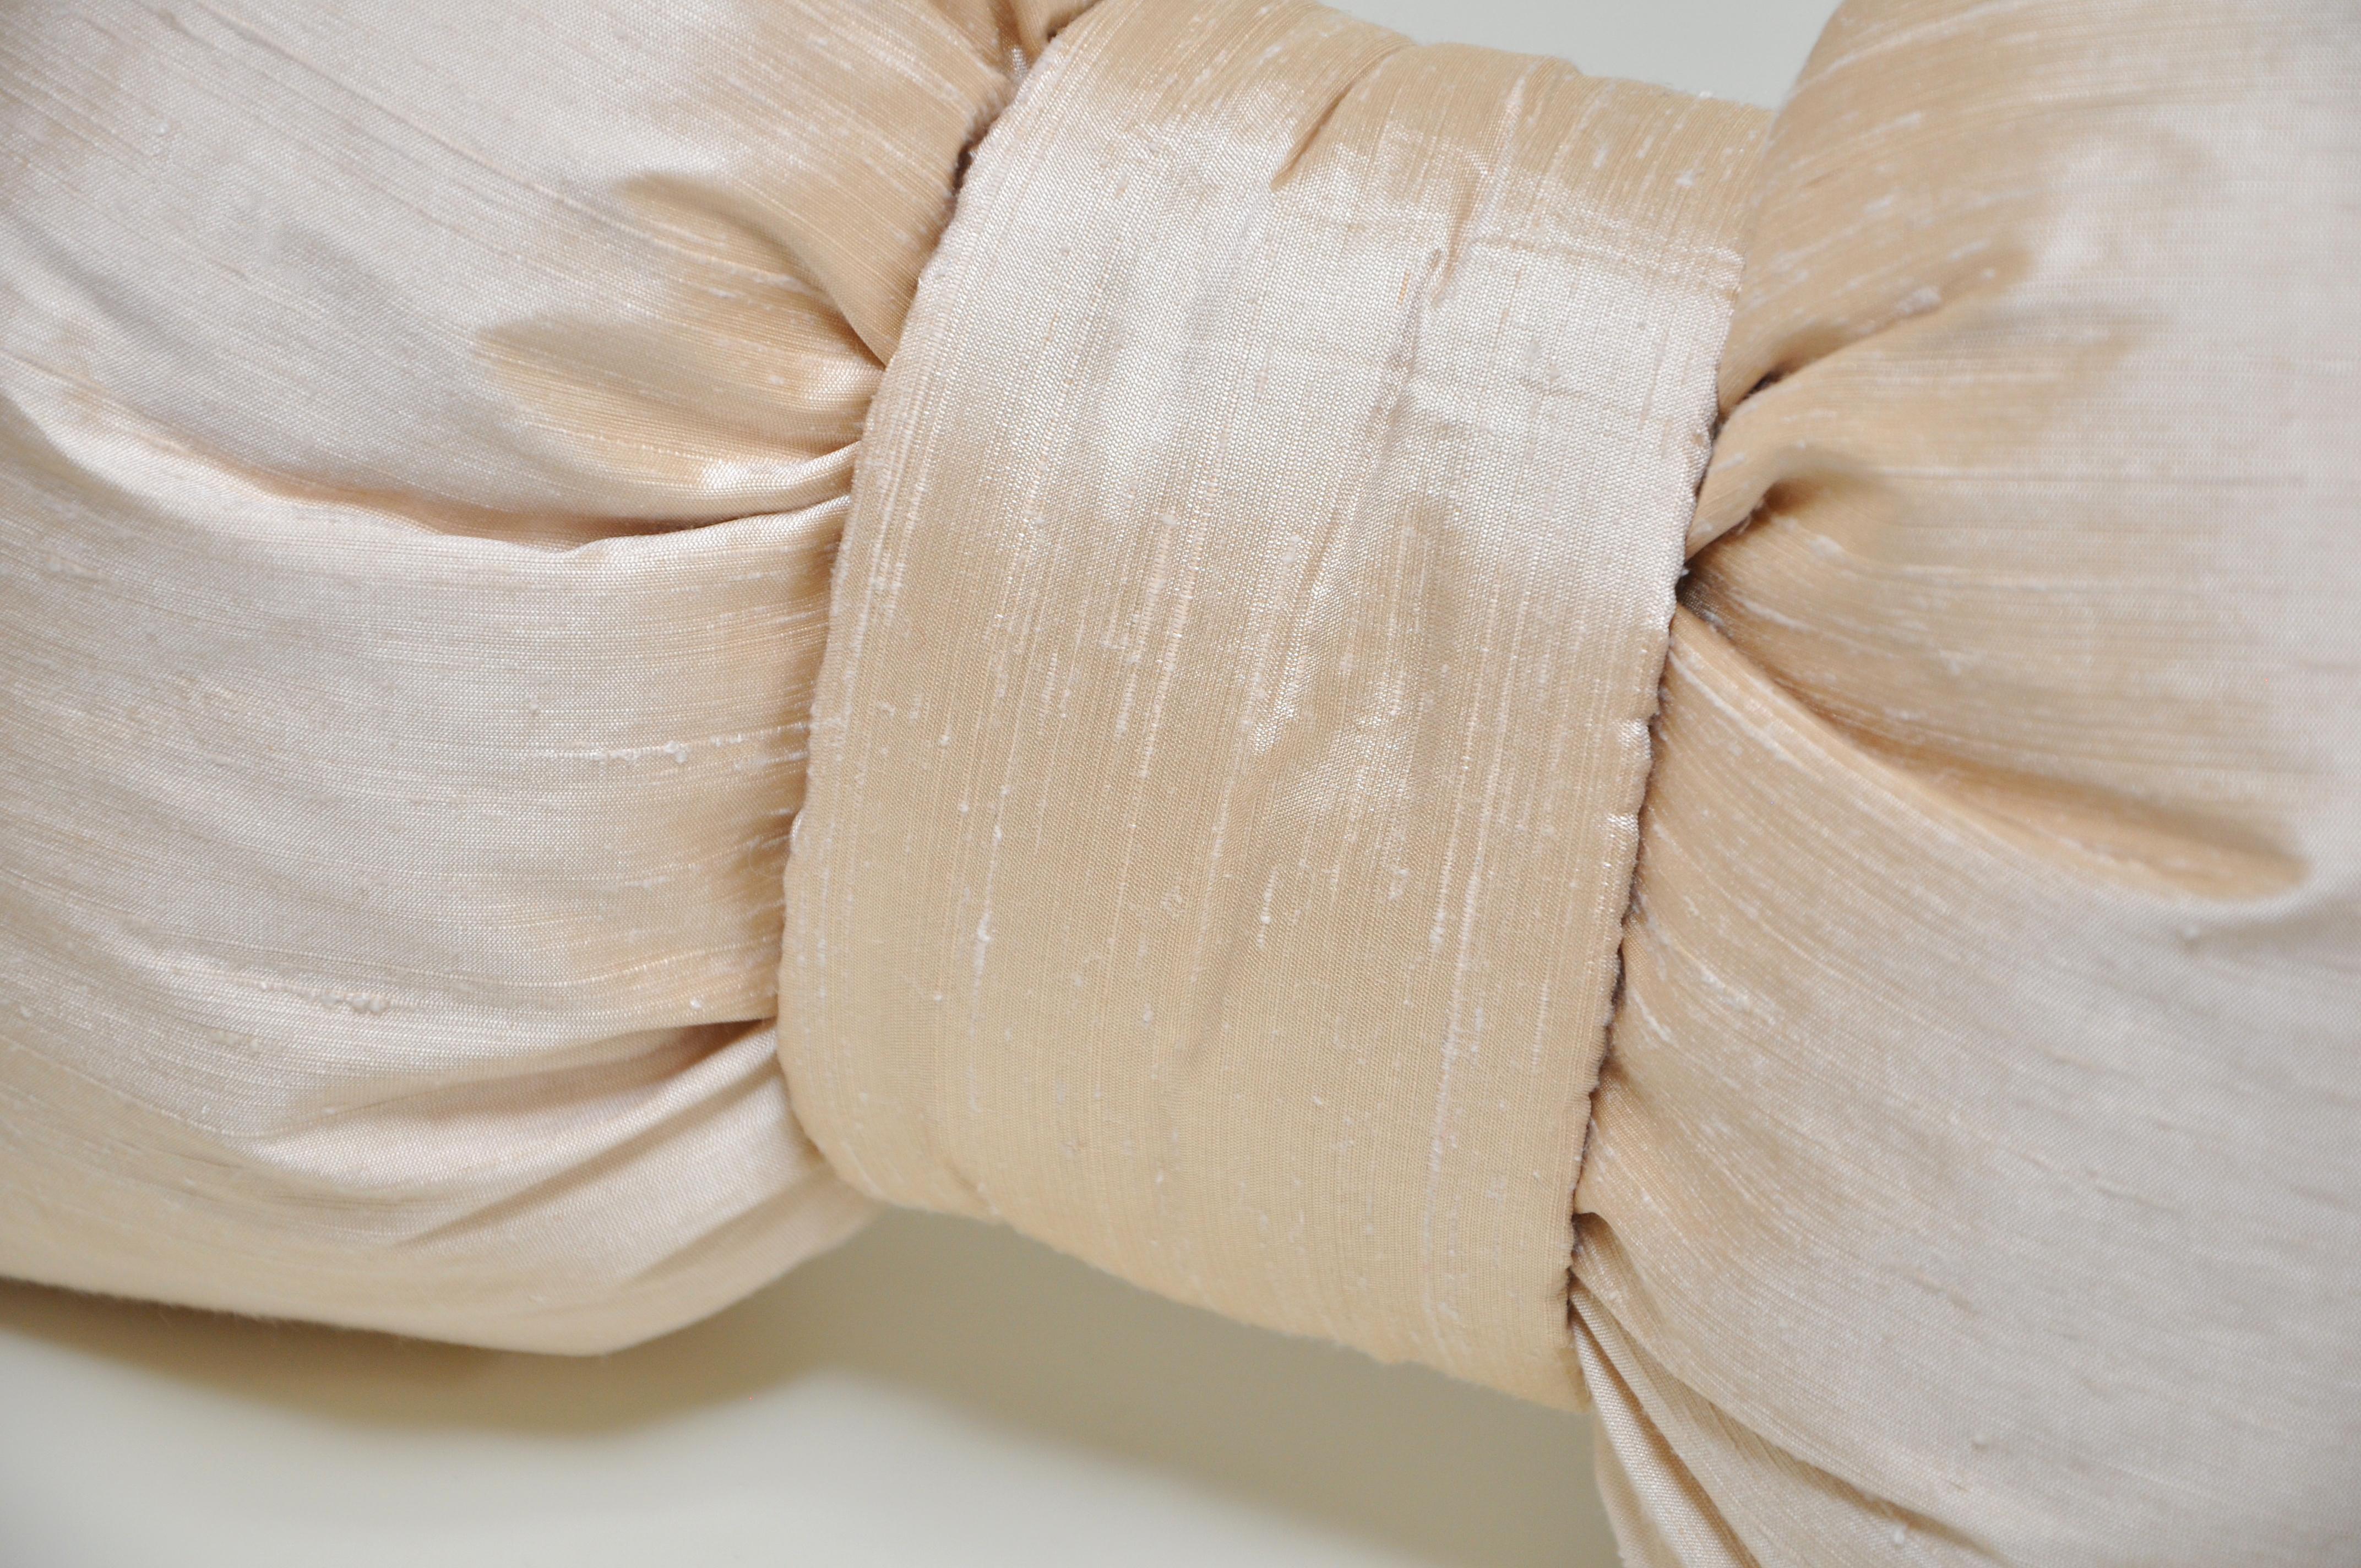 French antique light champagne cream nude blush peach silk bow cushion pillow

A custom made luxury contemporary cushion (pillow to our American customers) constructed using precious antique fabric. 100% pure raw silk, with its visible texture of